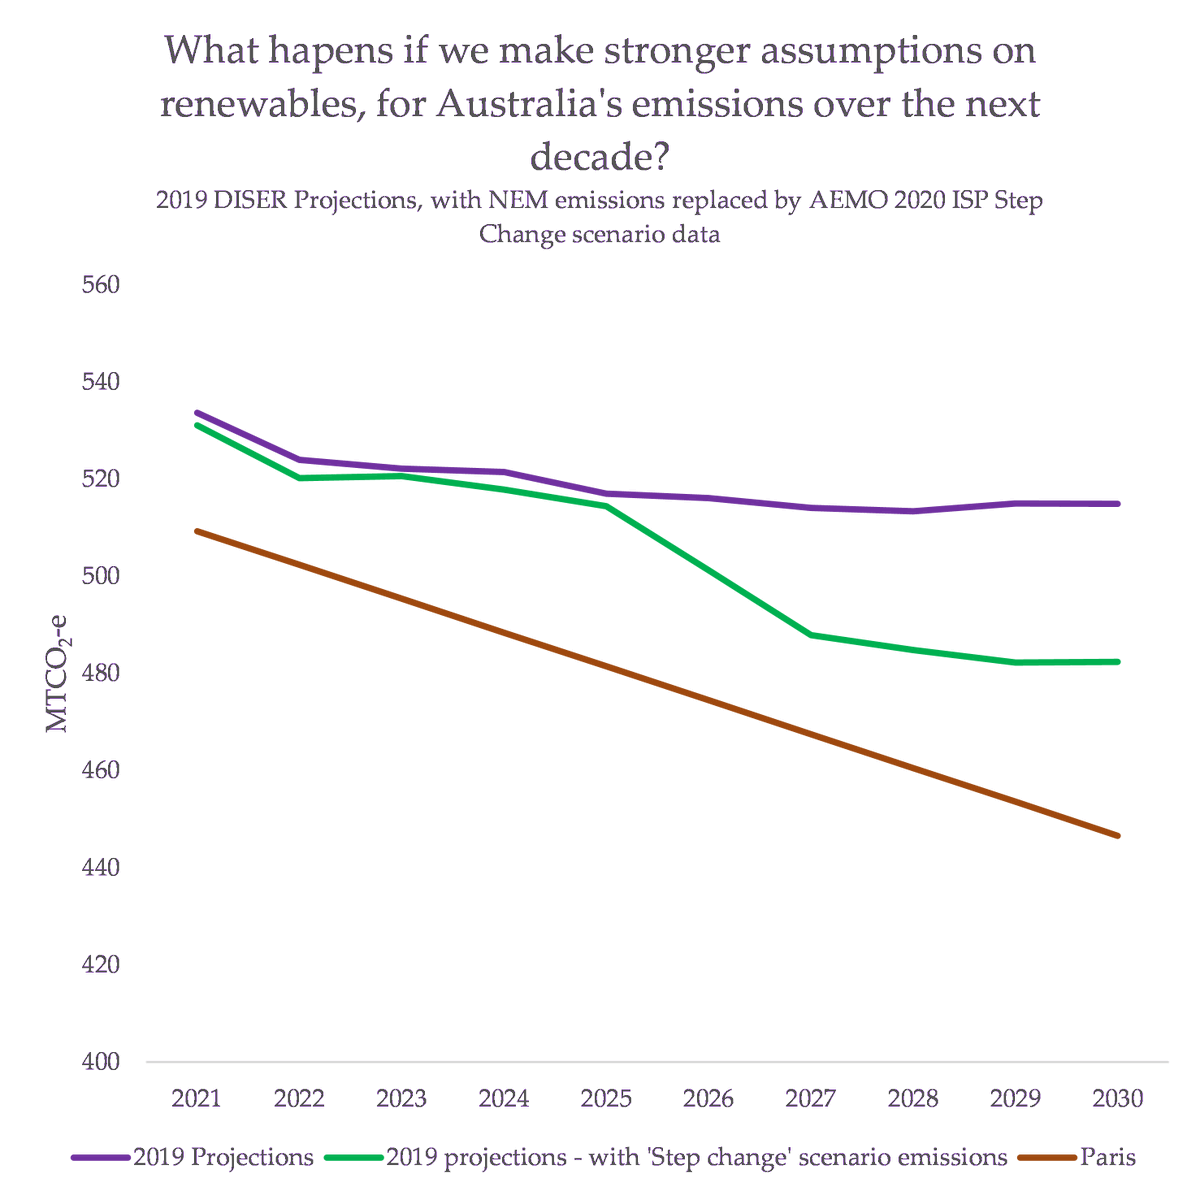 Since then, the gov't hasn't announced a single new policy that could have *any* impact. The 2019 renewable predictions were weak - but shifting to strong predictions still wouldn't be enough. So....how will the gap be filled?  https://reneweconomy.com.au/morrisons-infuriating-climate-pledge-well-only-cheat-if-we-need-to-70586/